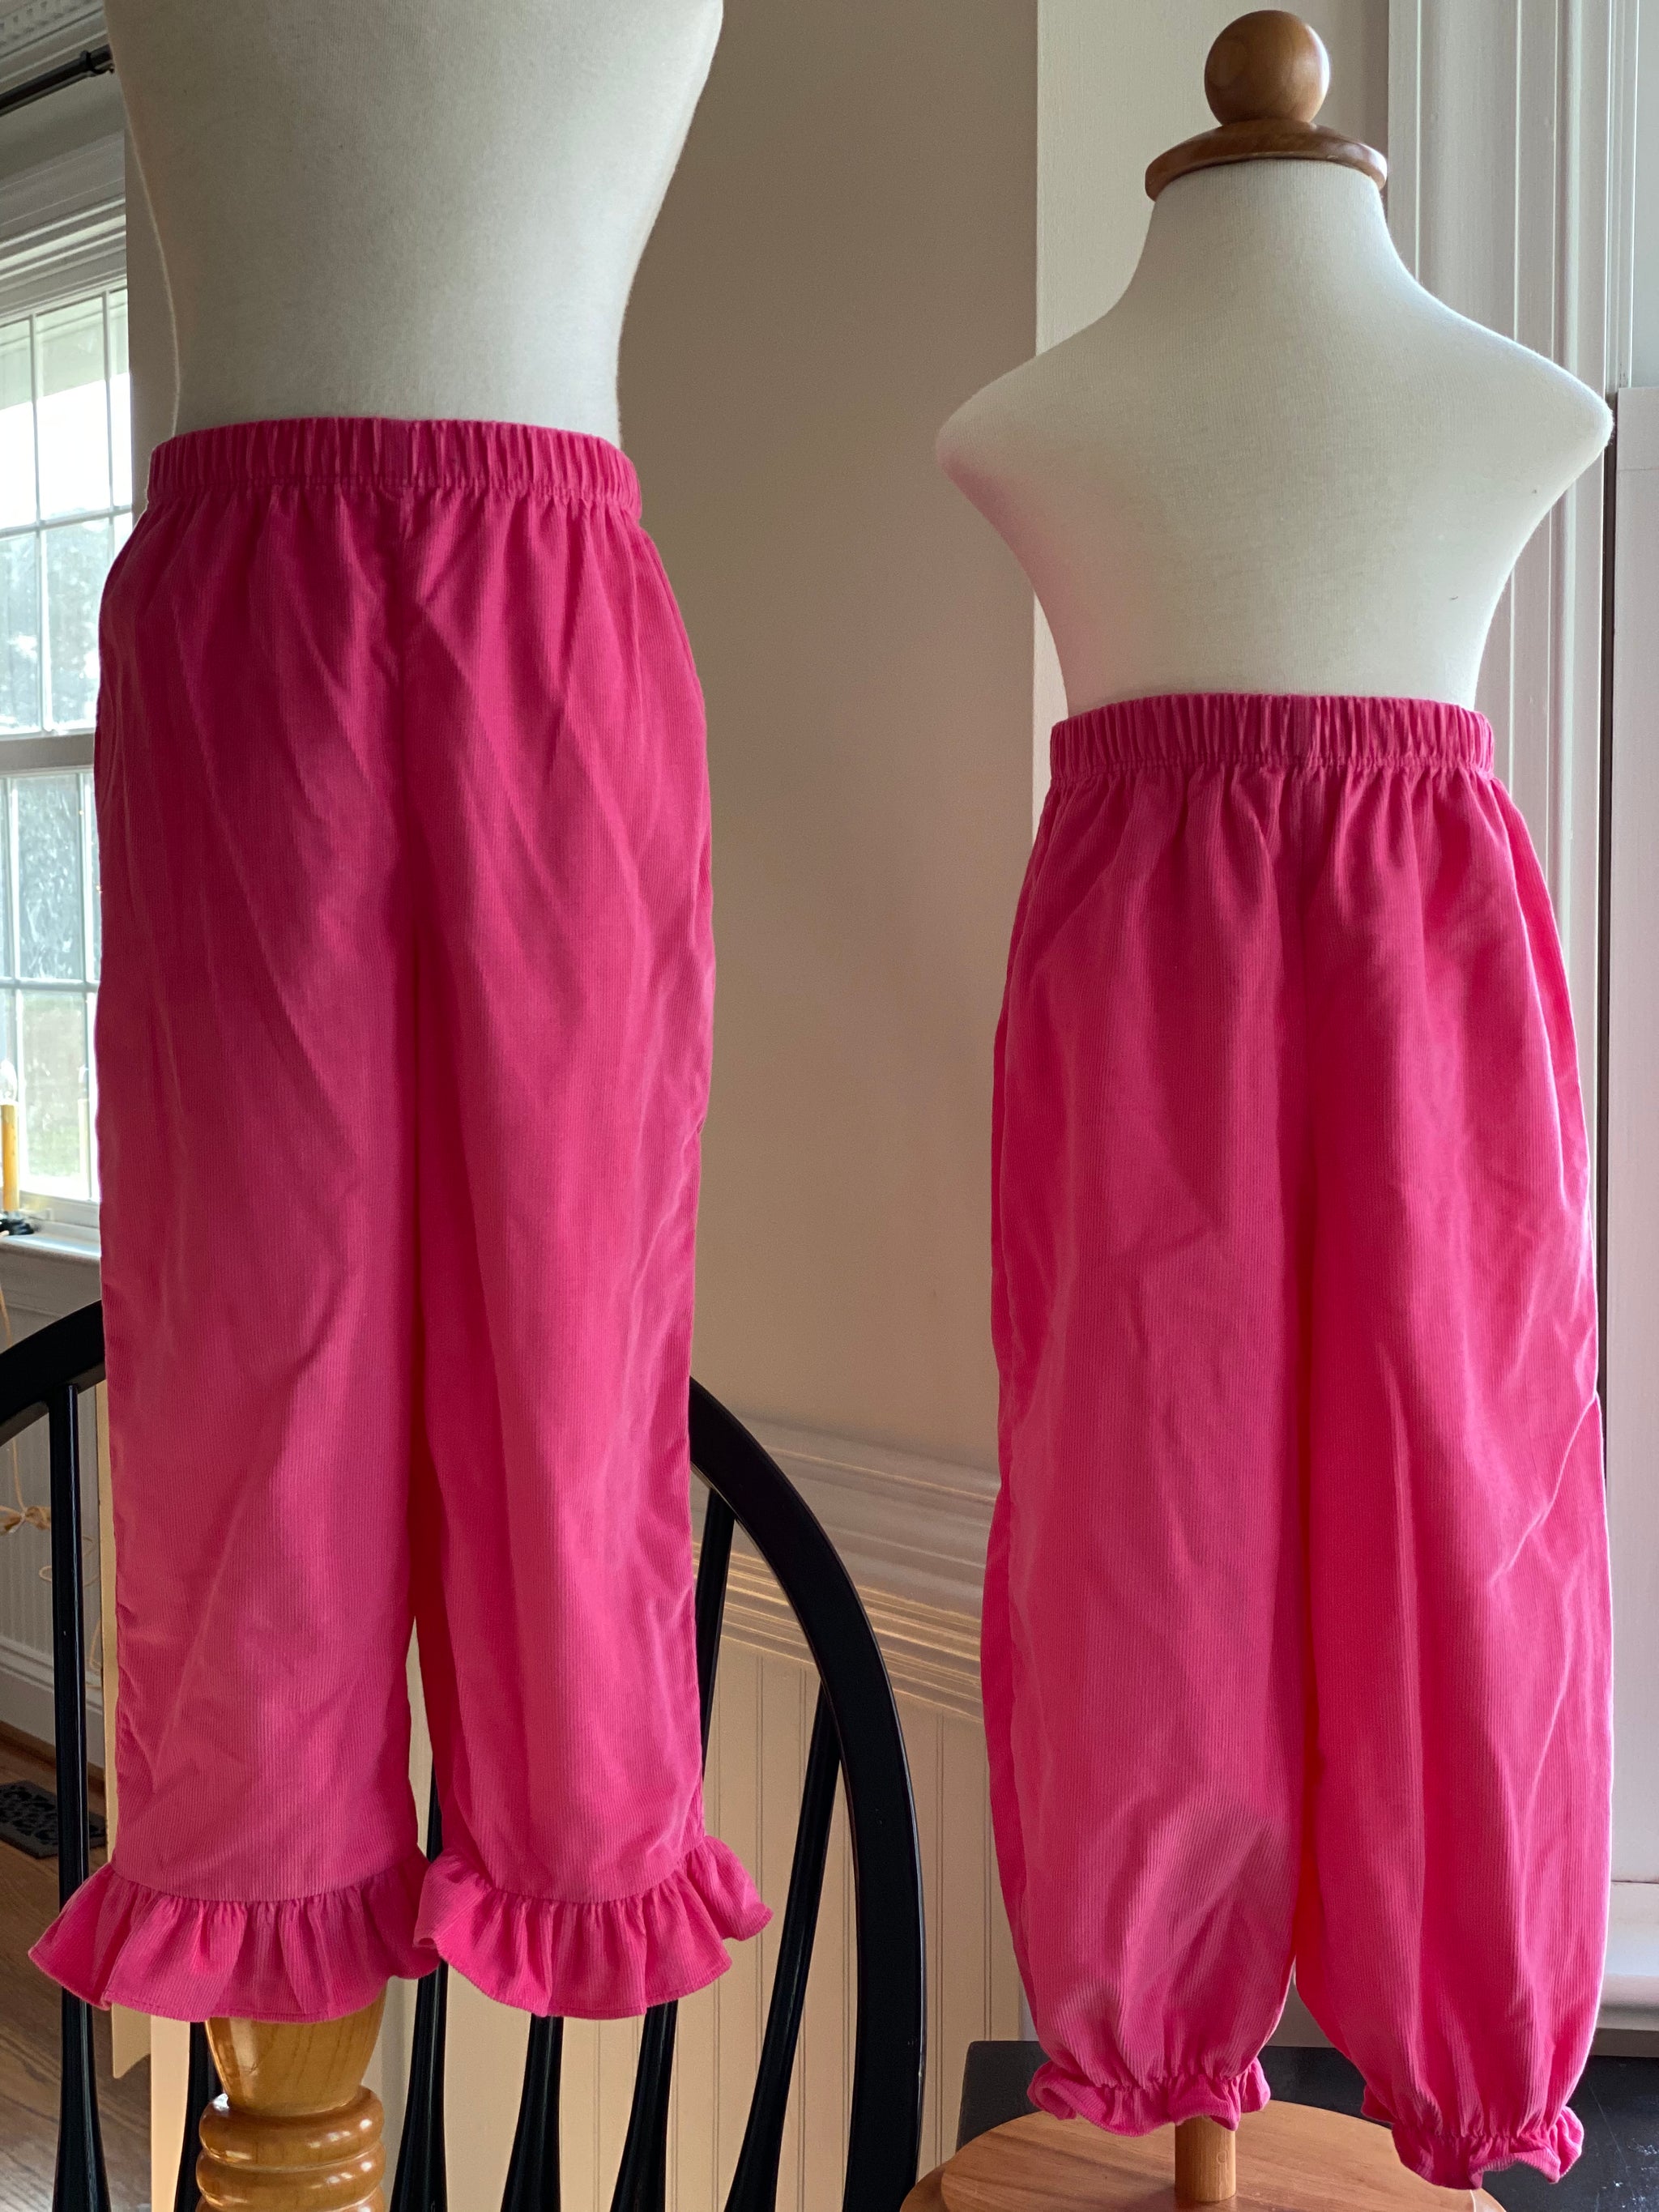 Girls Bright Pink Corduroy Bubble or Ruffle Pants - The Bubble Bee